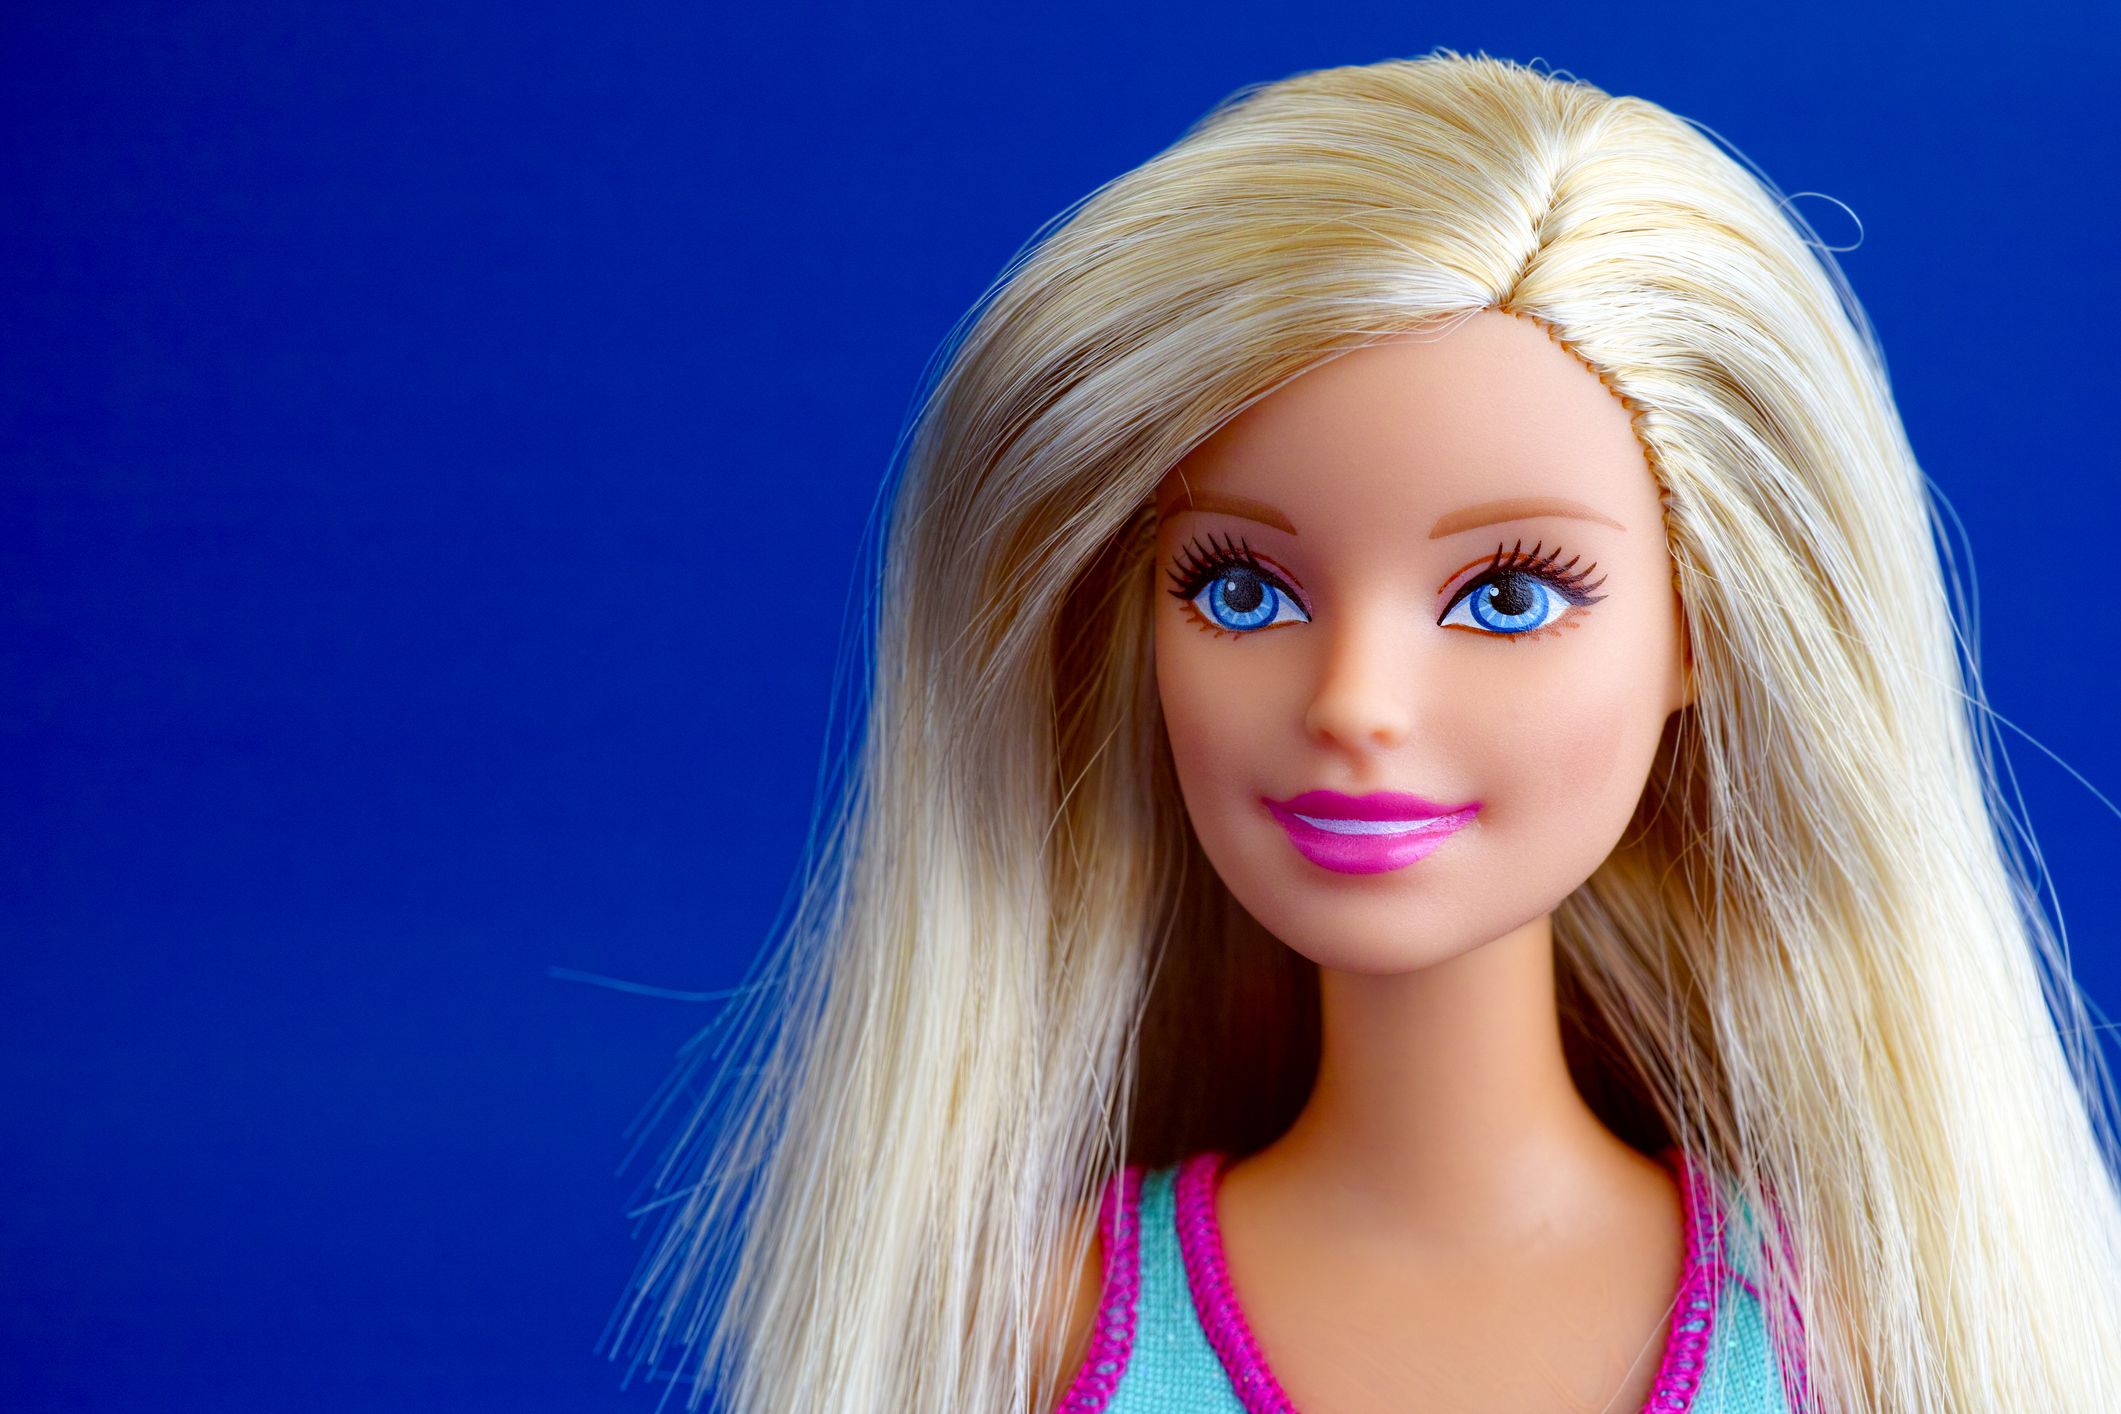 40 Barbie Doll Facts  History and Trivia About Barbies